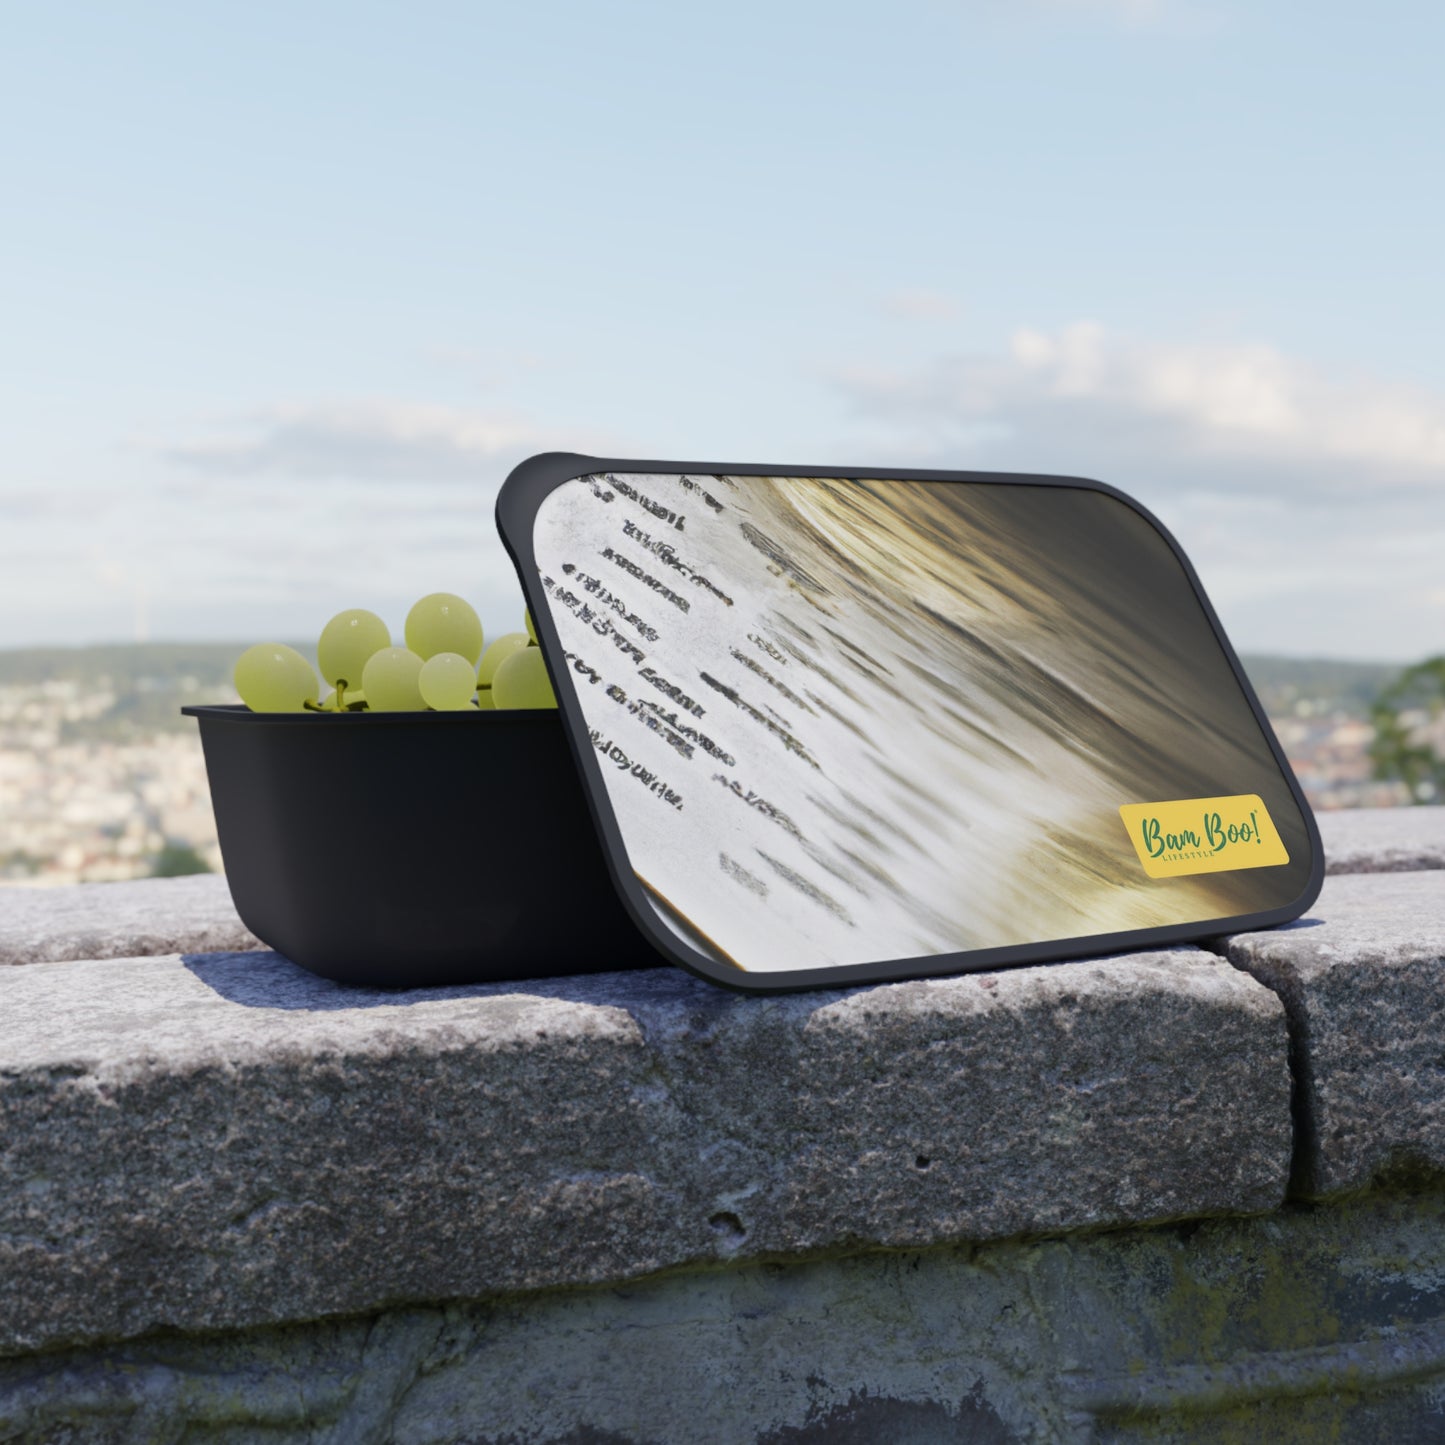 "Time Illuminated: Exploring Light and Texture Through Layered Art" - Bam Boo! Lifestyle Eco-friendly PLA Bento Box with Band and Utensils